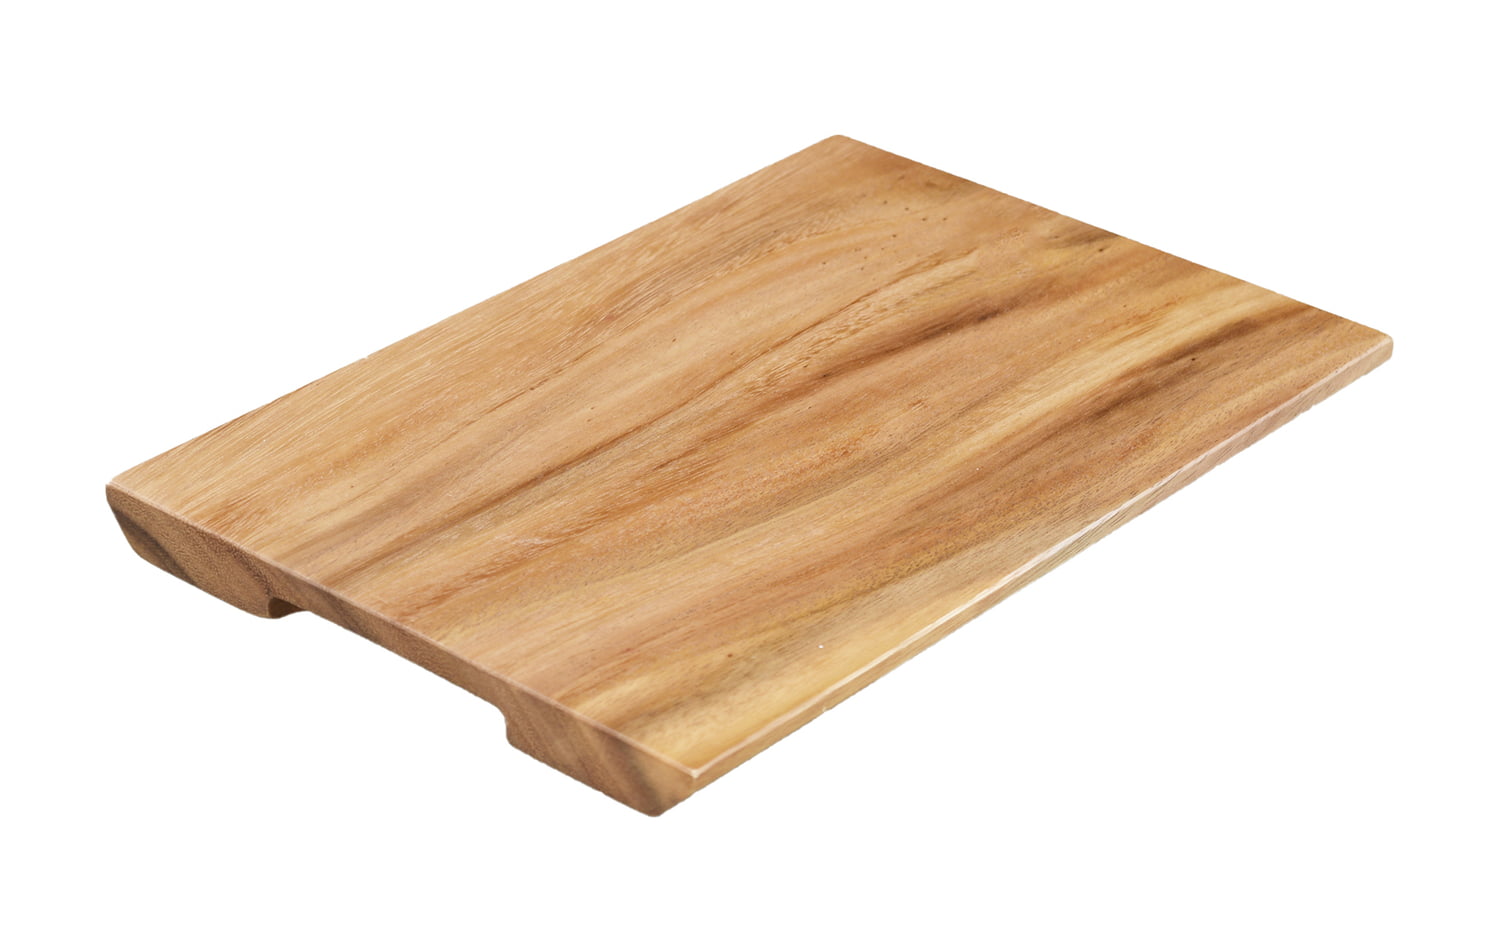 Ikoopy Wood Cutting Board Acacia Wood Charcuterie Board with Handle Round/Rectangular Portable Wood Dinner Plate Serving Tray Kitchen Chopping Board